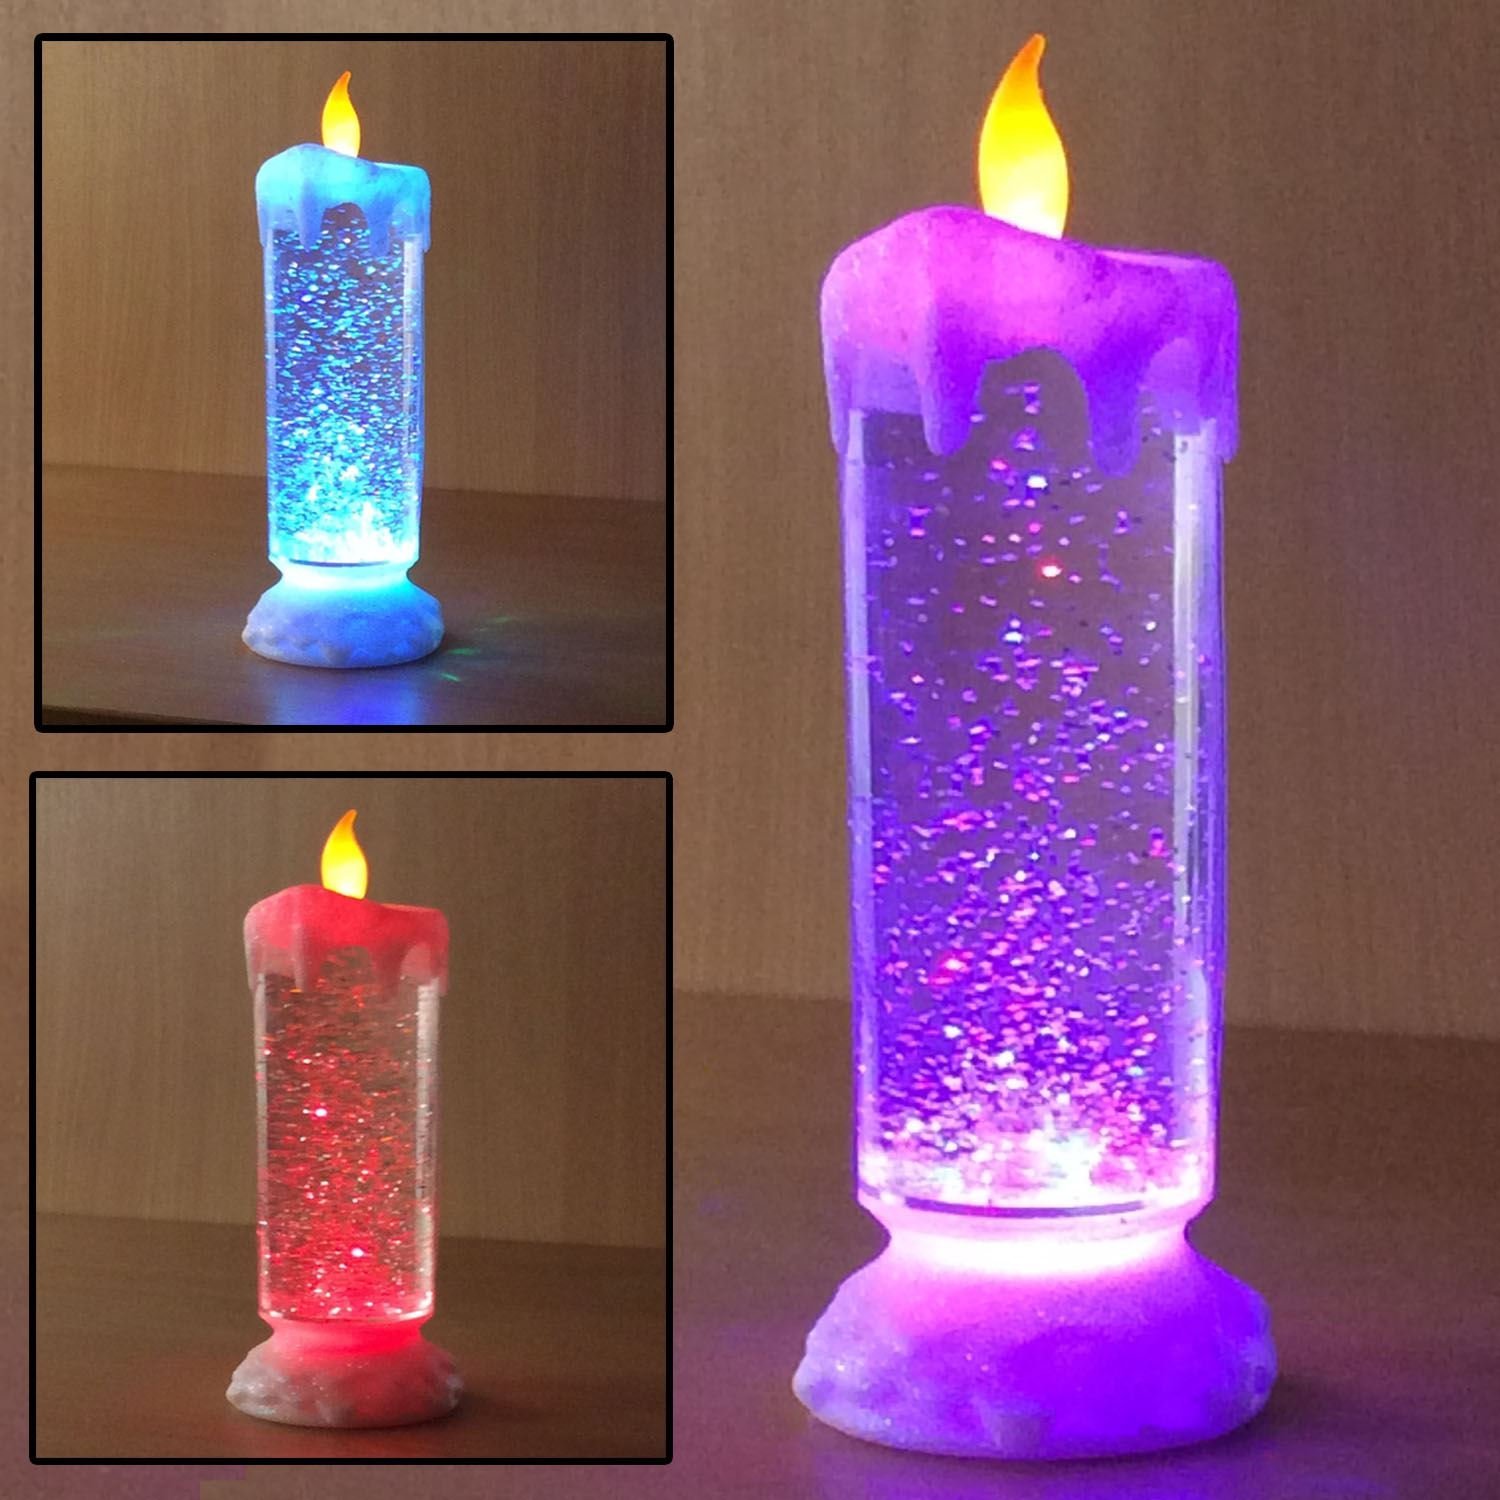 Sentik 24cm Swirling Colour Changing LED Flickering Water Candle ...